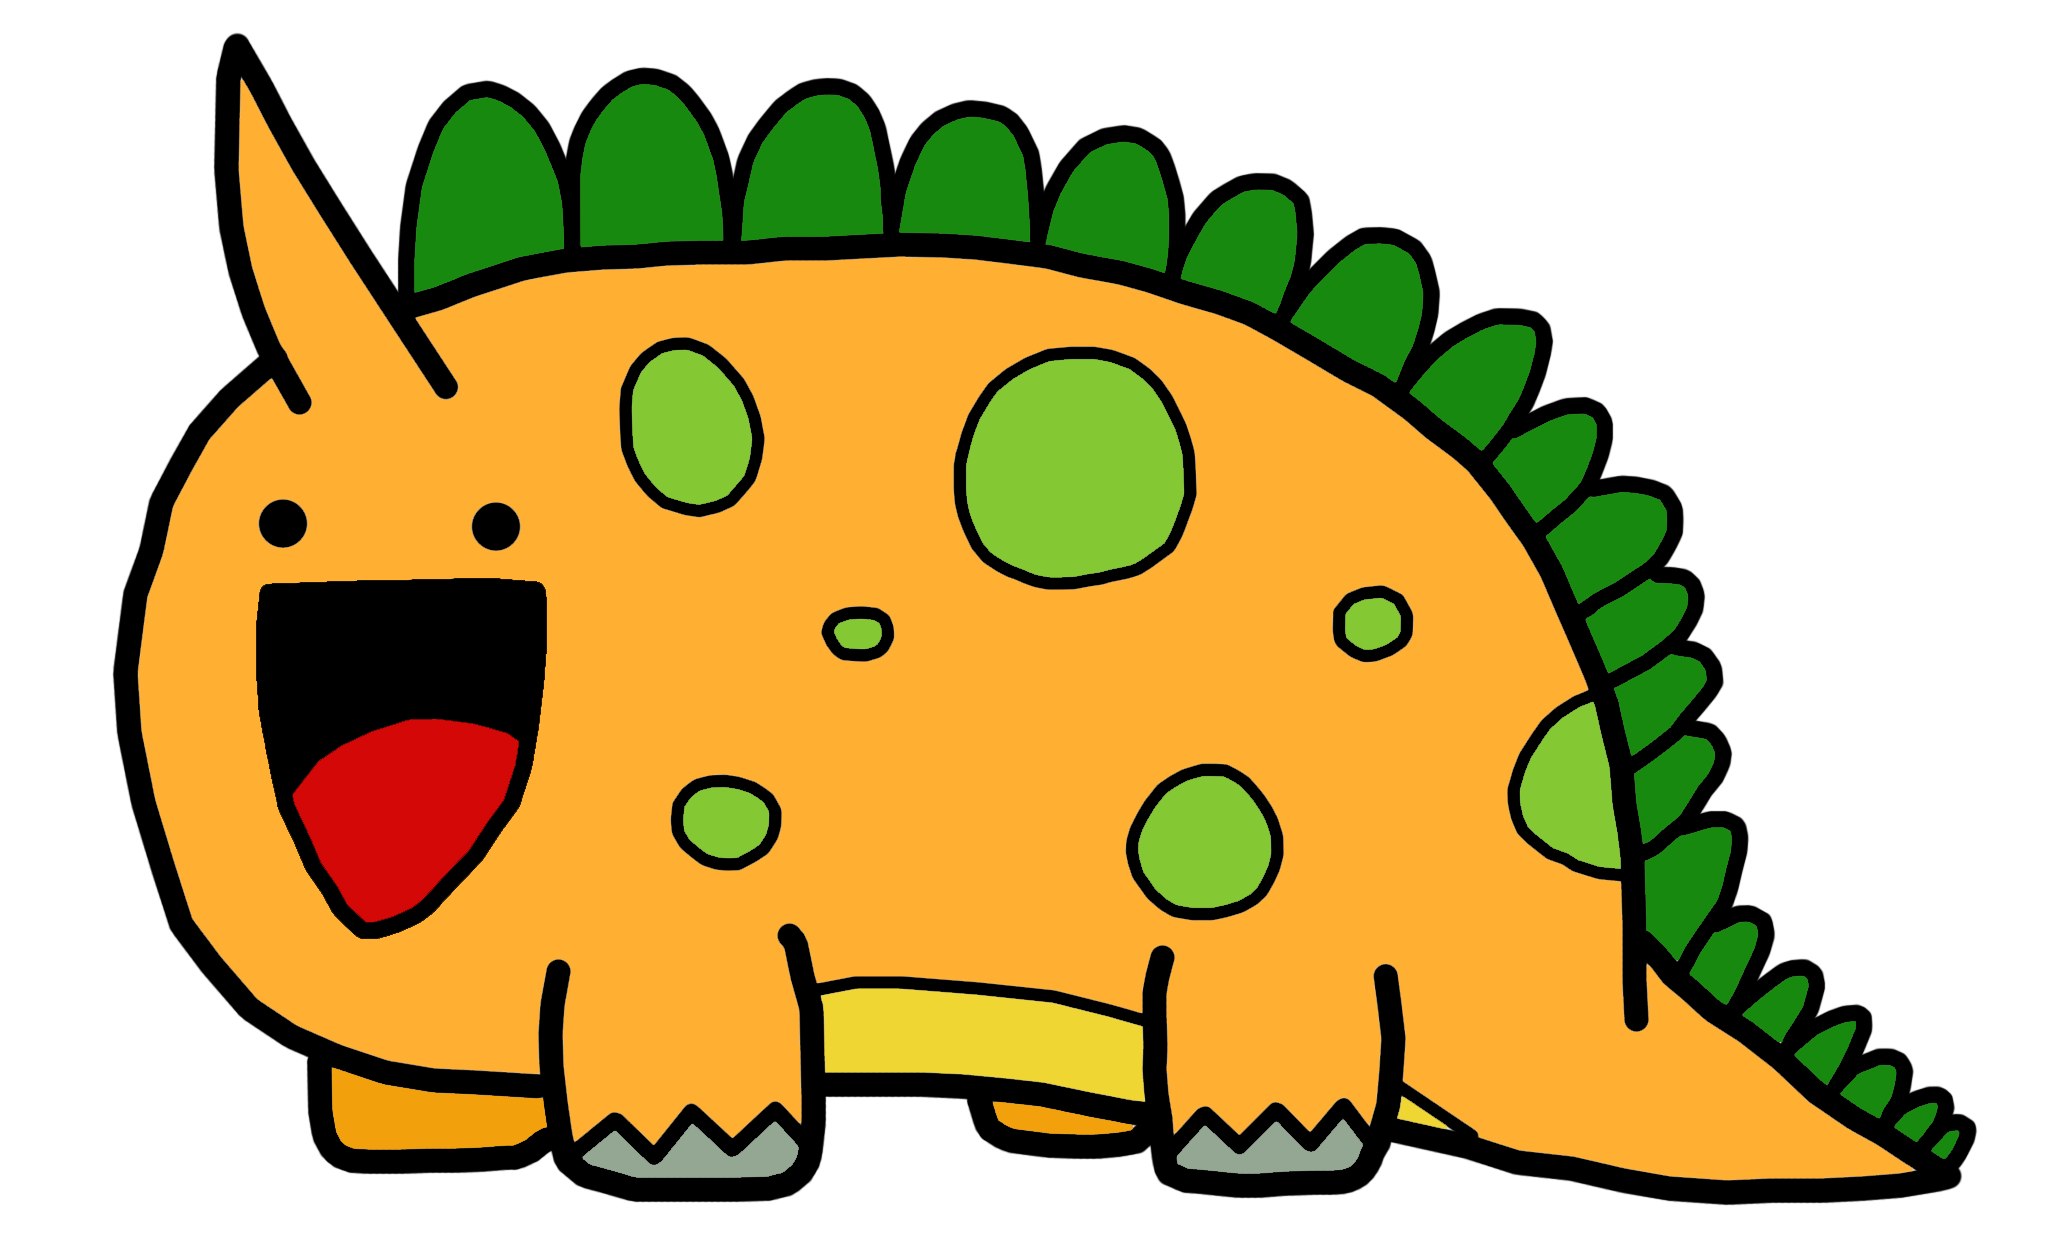 Cute Dino PNG Image File